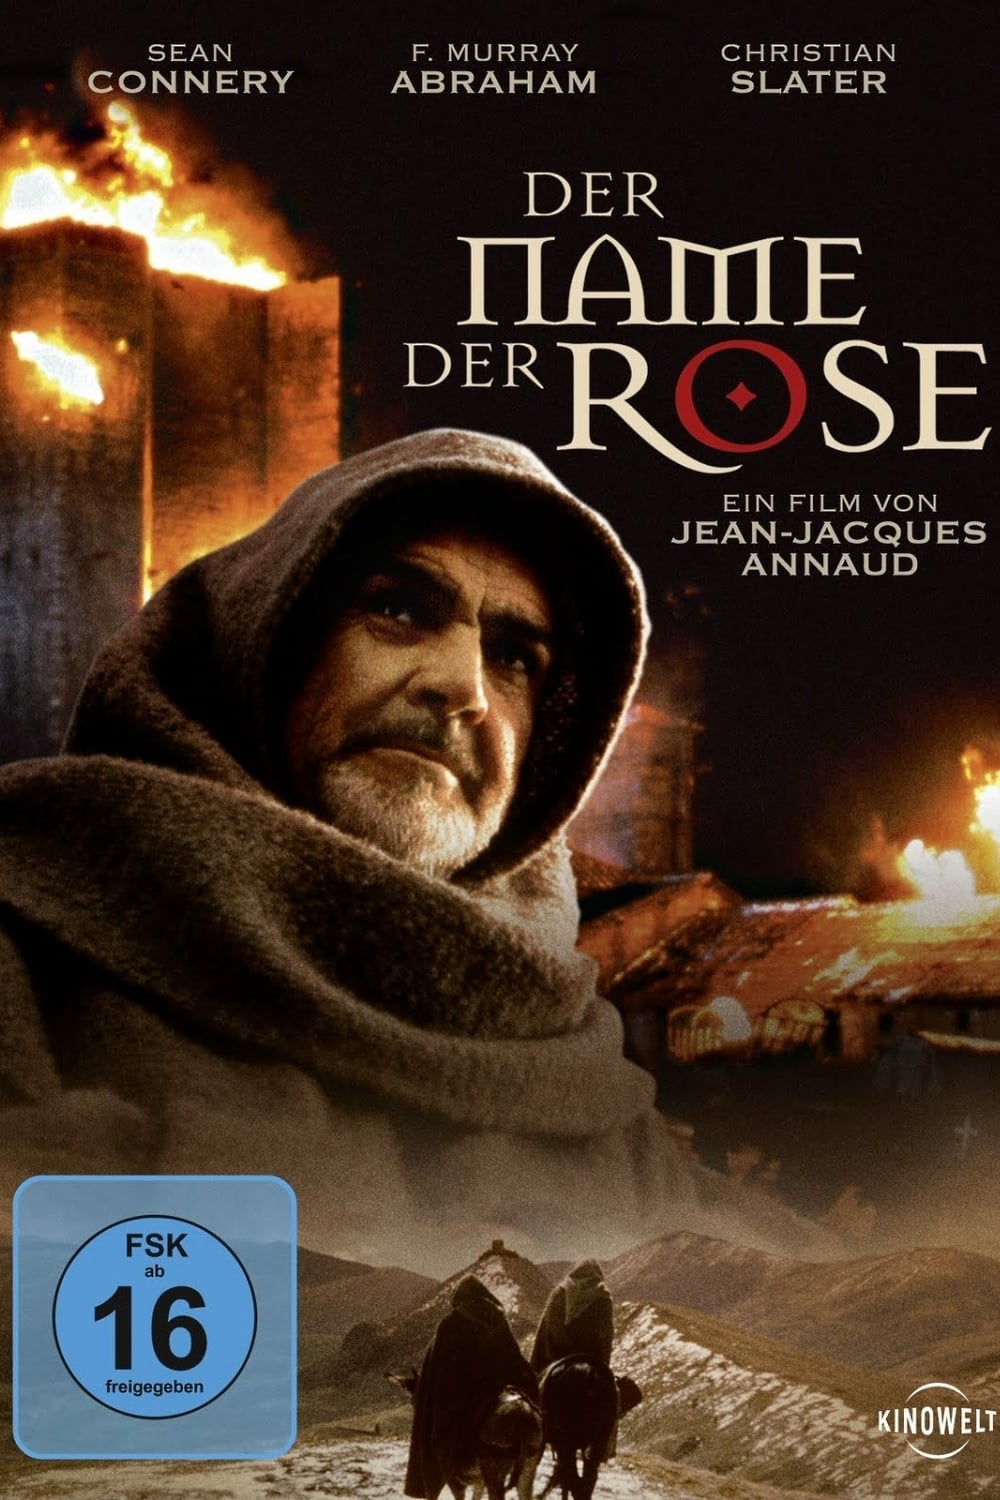 The Name of the Rose 1986 - IMDb